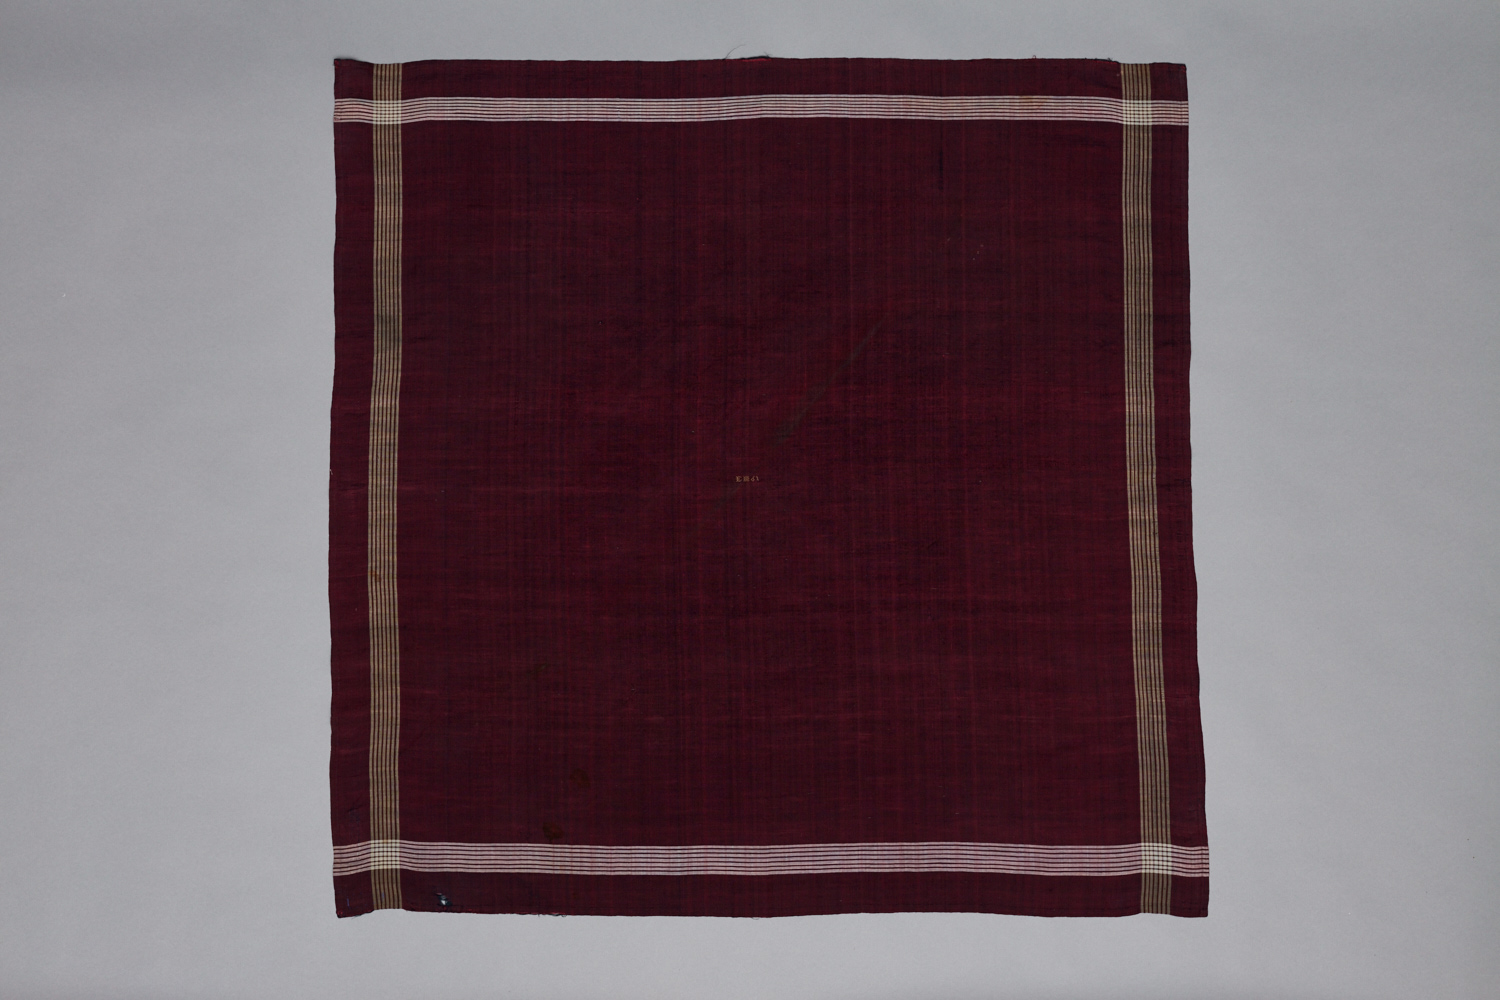 A maroon and tan striped cloth hanging on a gray background.